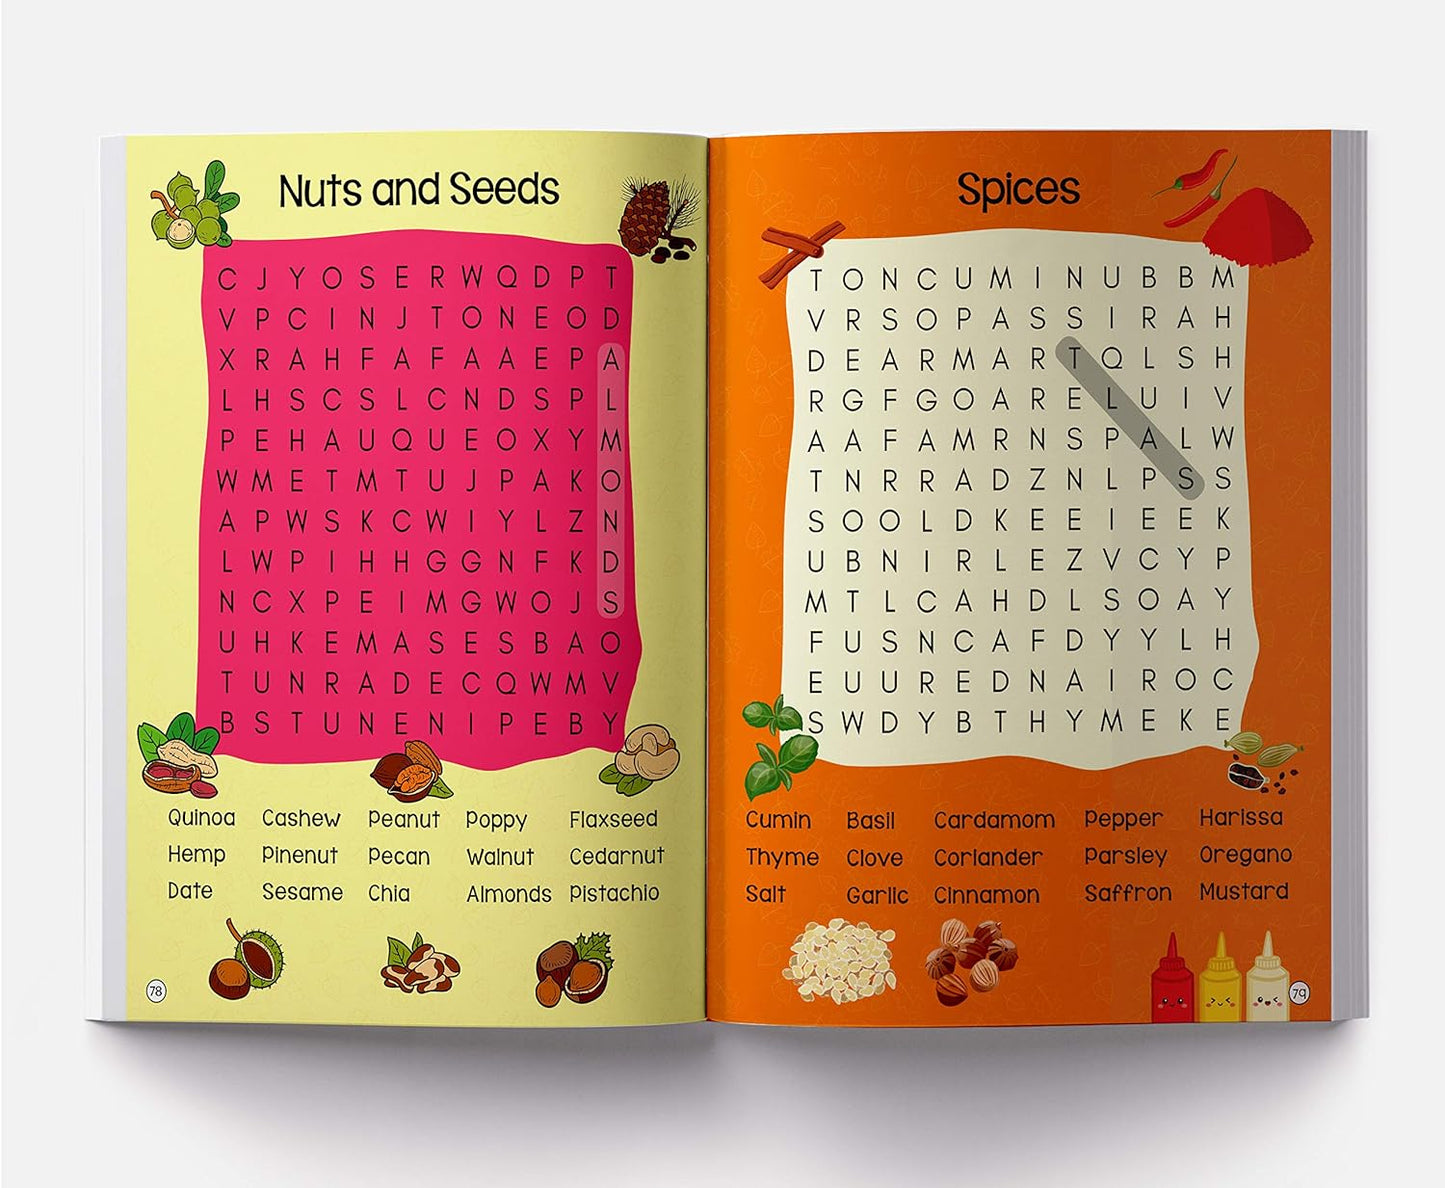 101 Word Search Activity Book: Large Grid Word Search Puzzles for Kids With Attractive Illustrations Paperback14